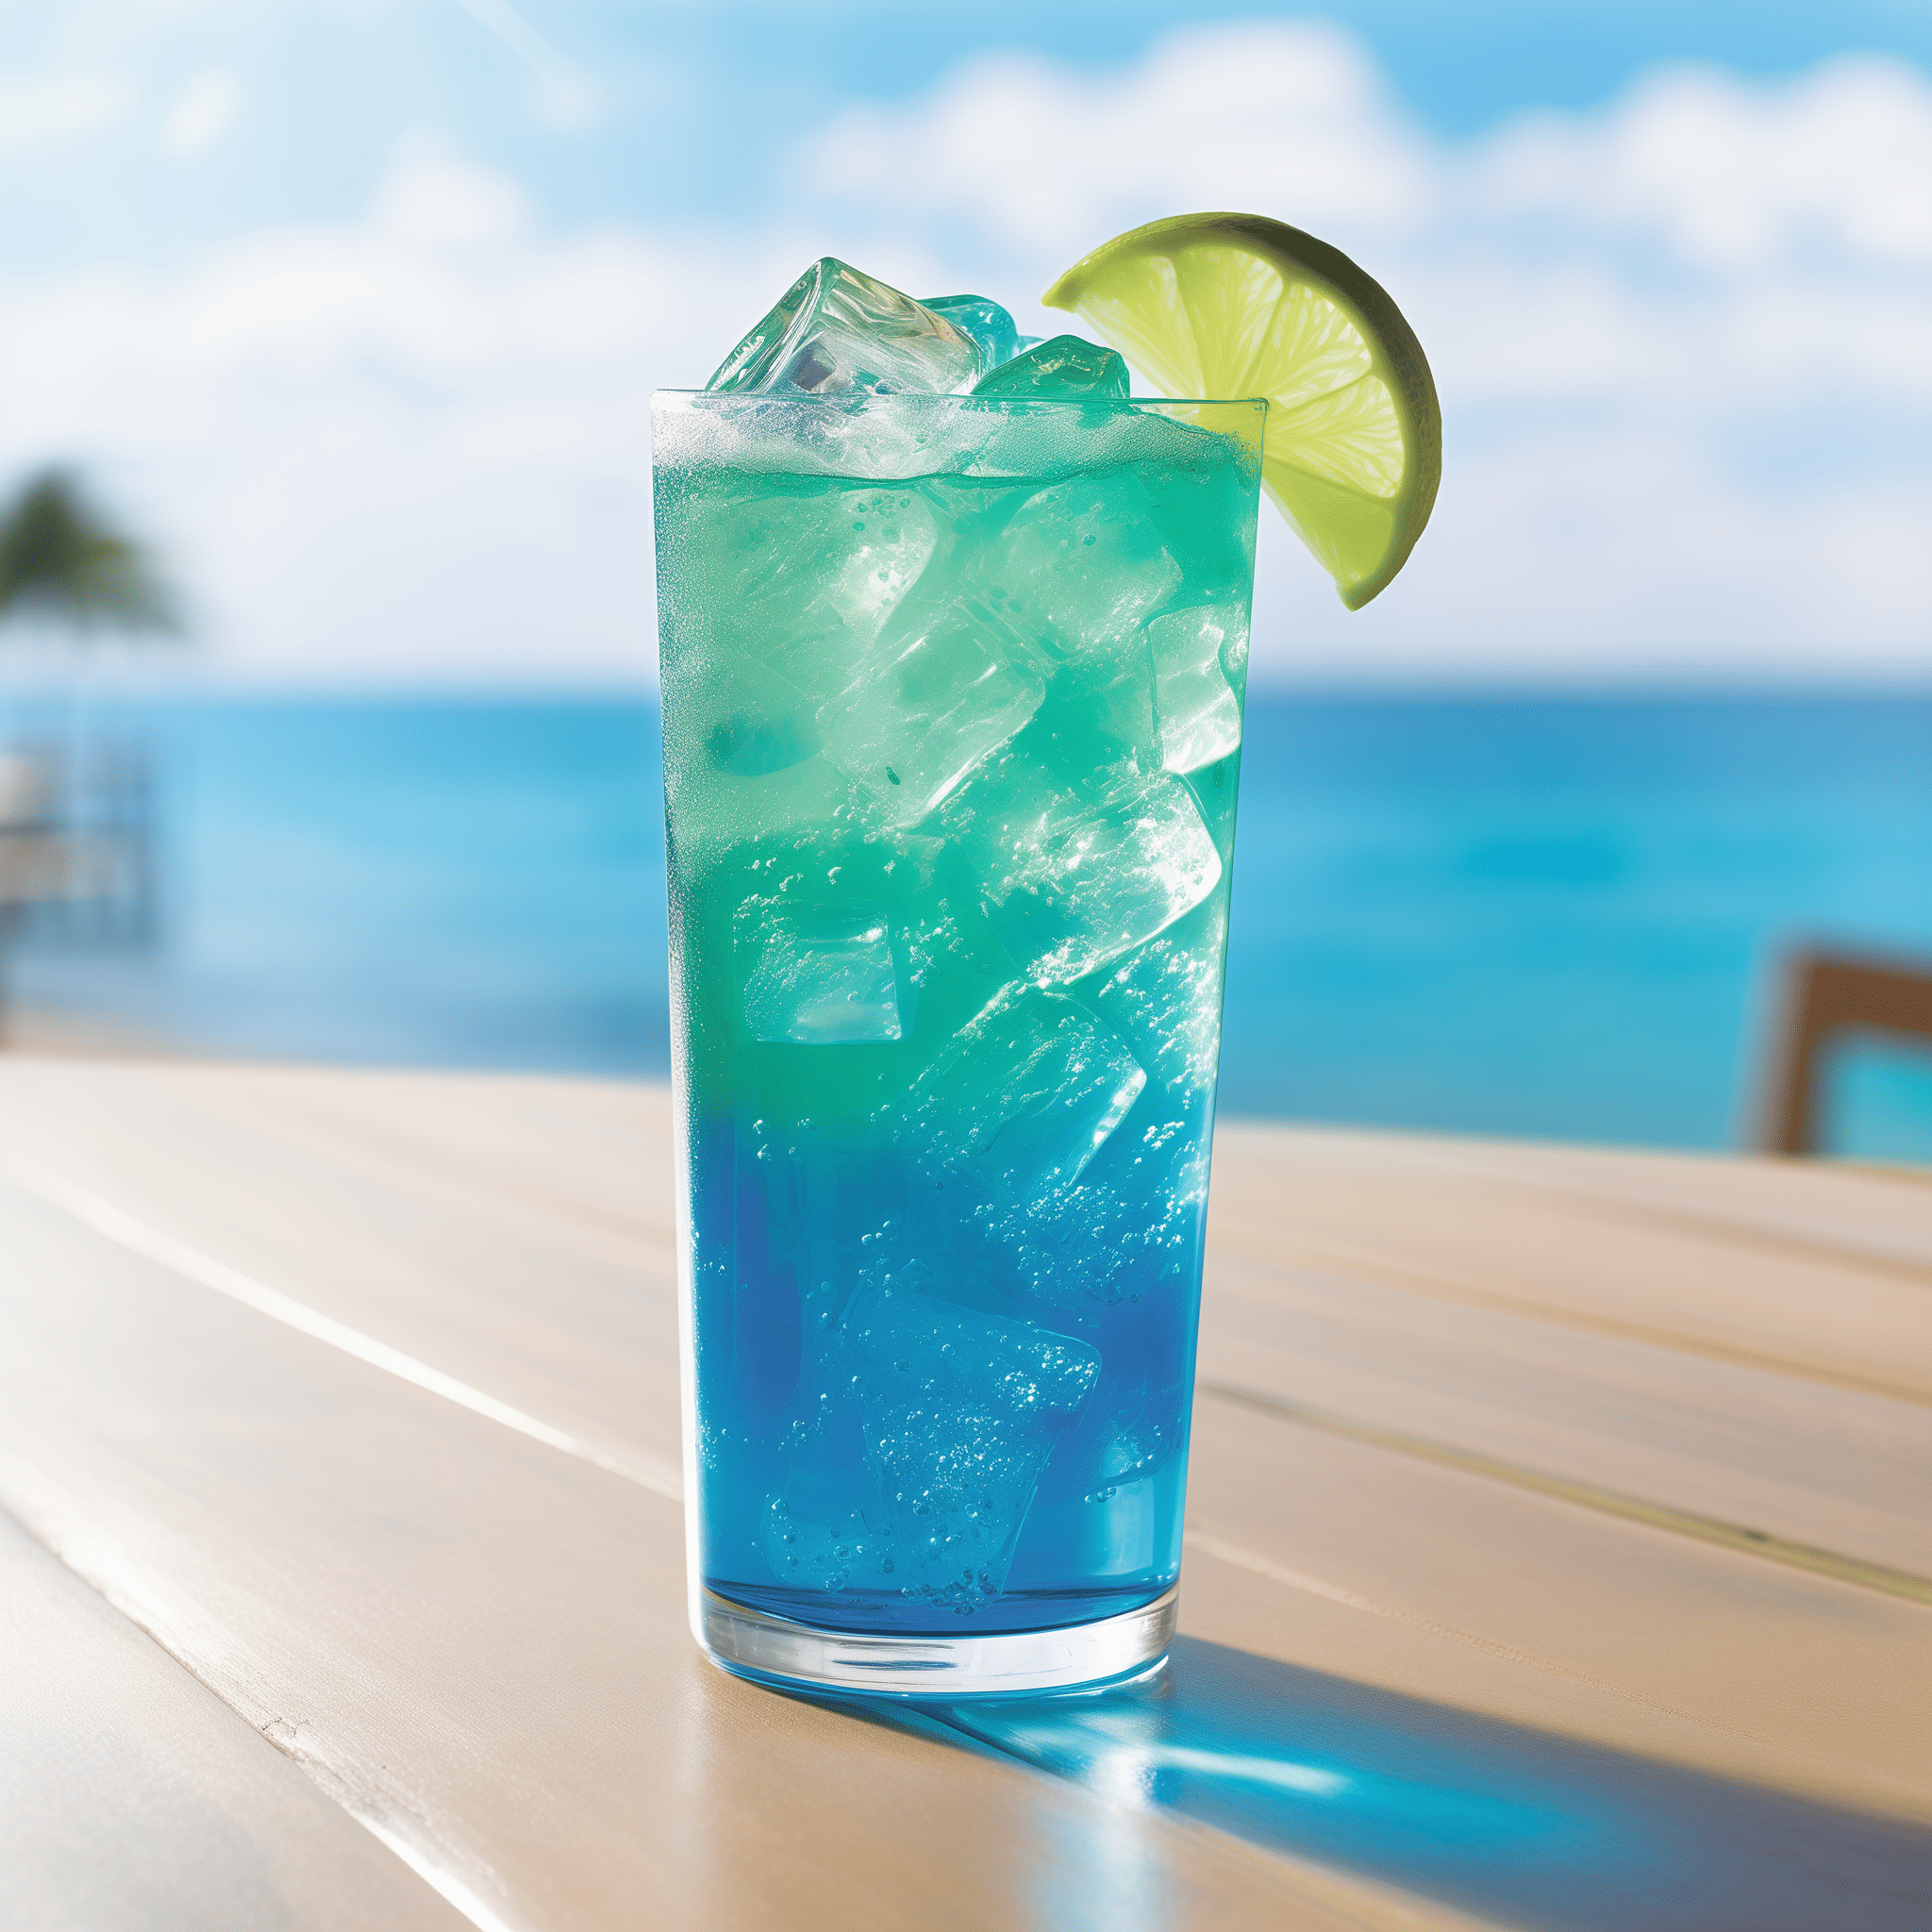 Mermaid Blue Cocktail Recipe - The Mermaid Blue cocktail offers a refreshing, citrusy taste with a sweet and slightly spicy undercurrent from the ginger beer. The vodka provides a smooth, strong backbone, while the blue curacao imparts a sweet orange flavor and the signature blue hue.